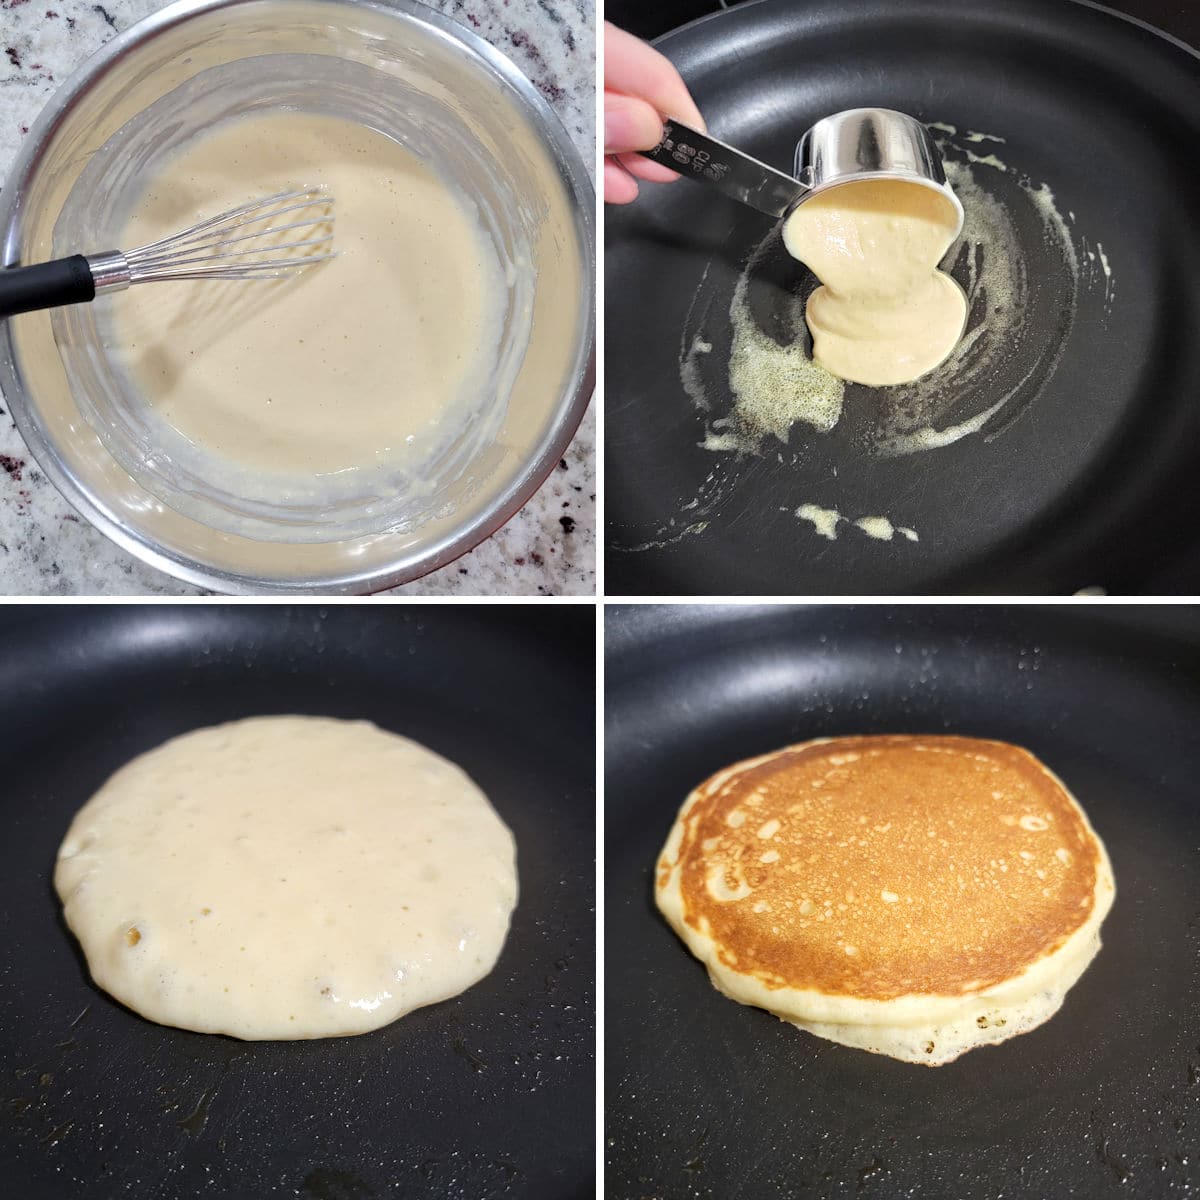 Pouring pancake batter into a skillet and cooking a pancake.